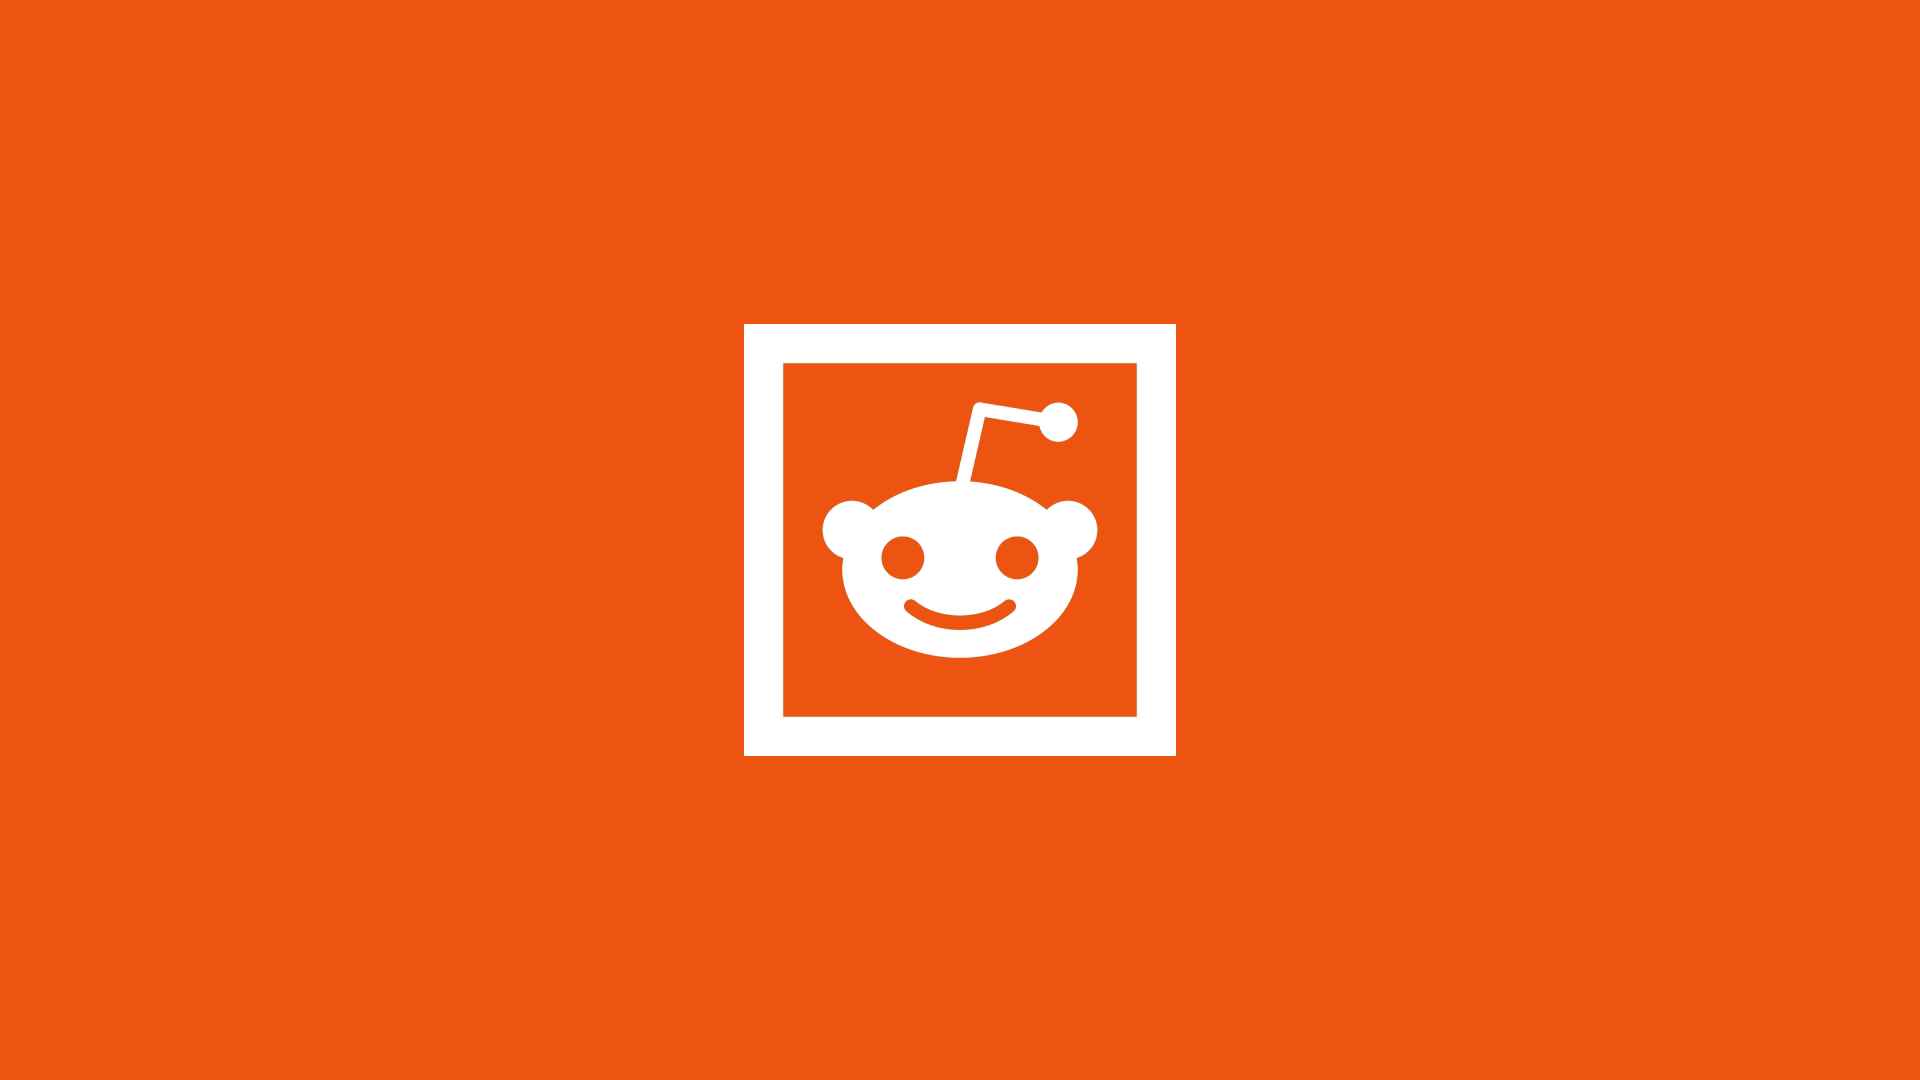 How can you search for specific topics or discussions on Reddit?